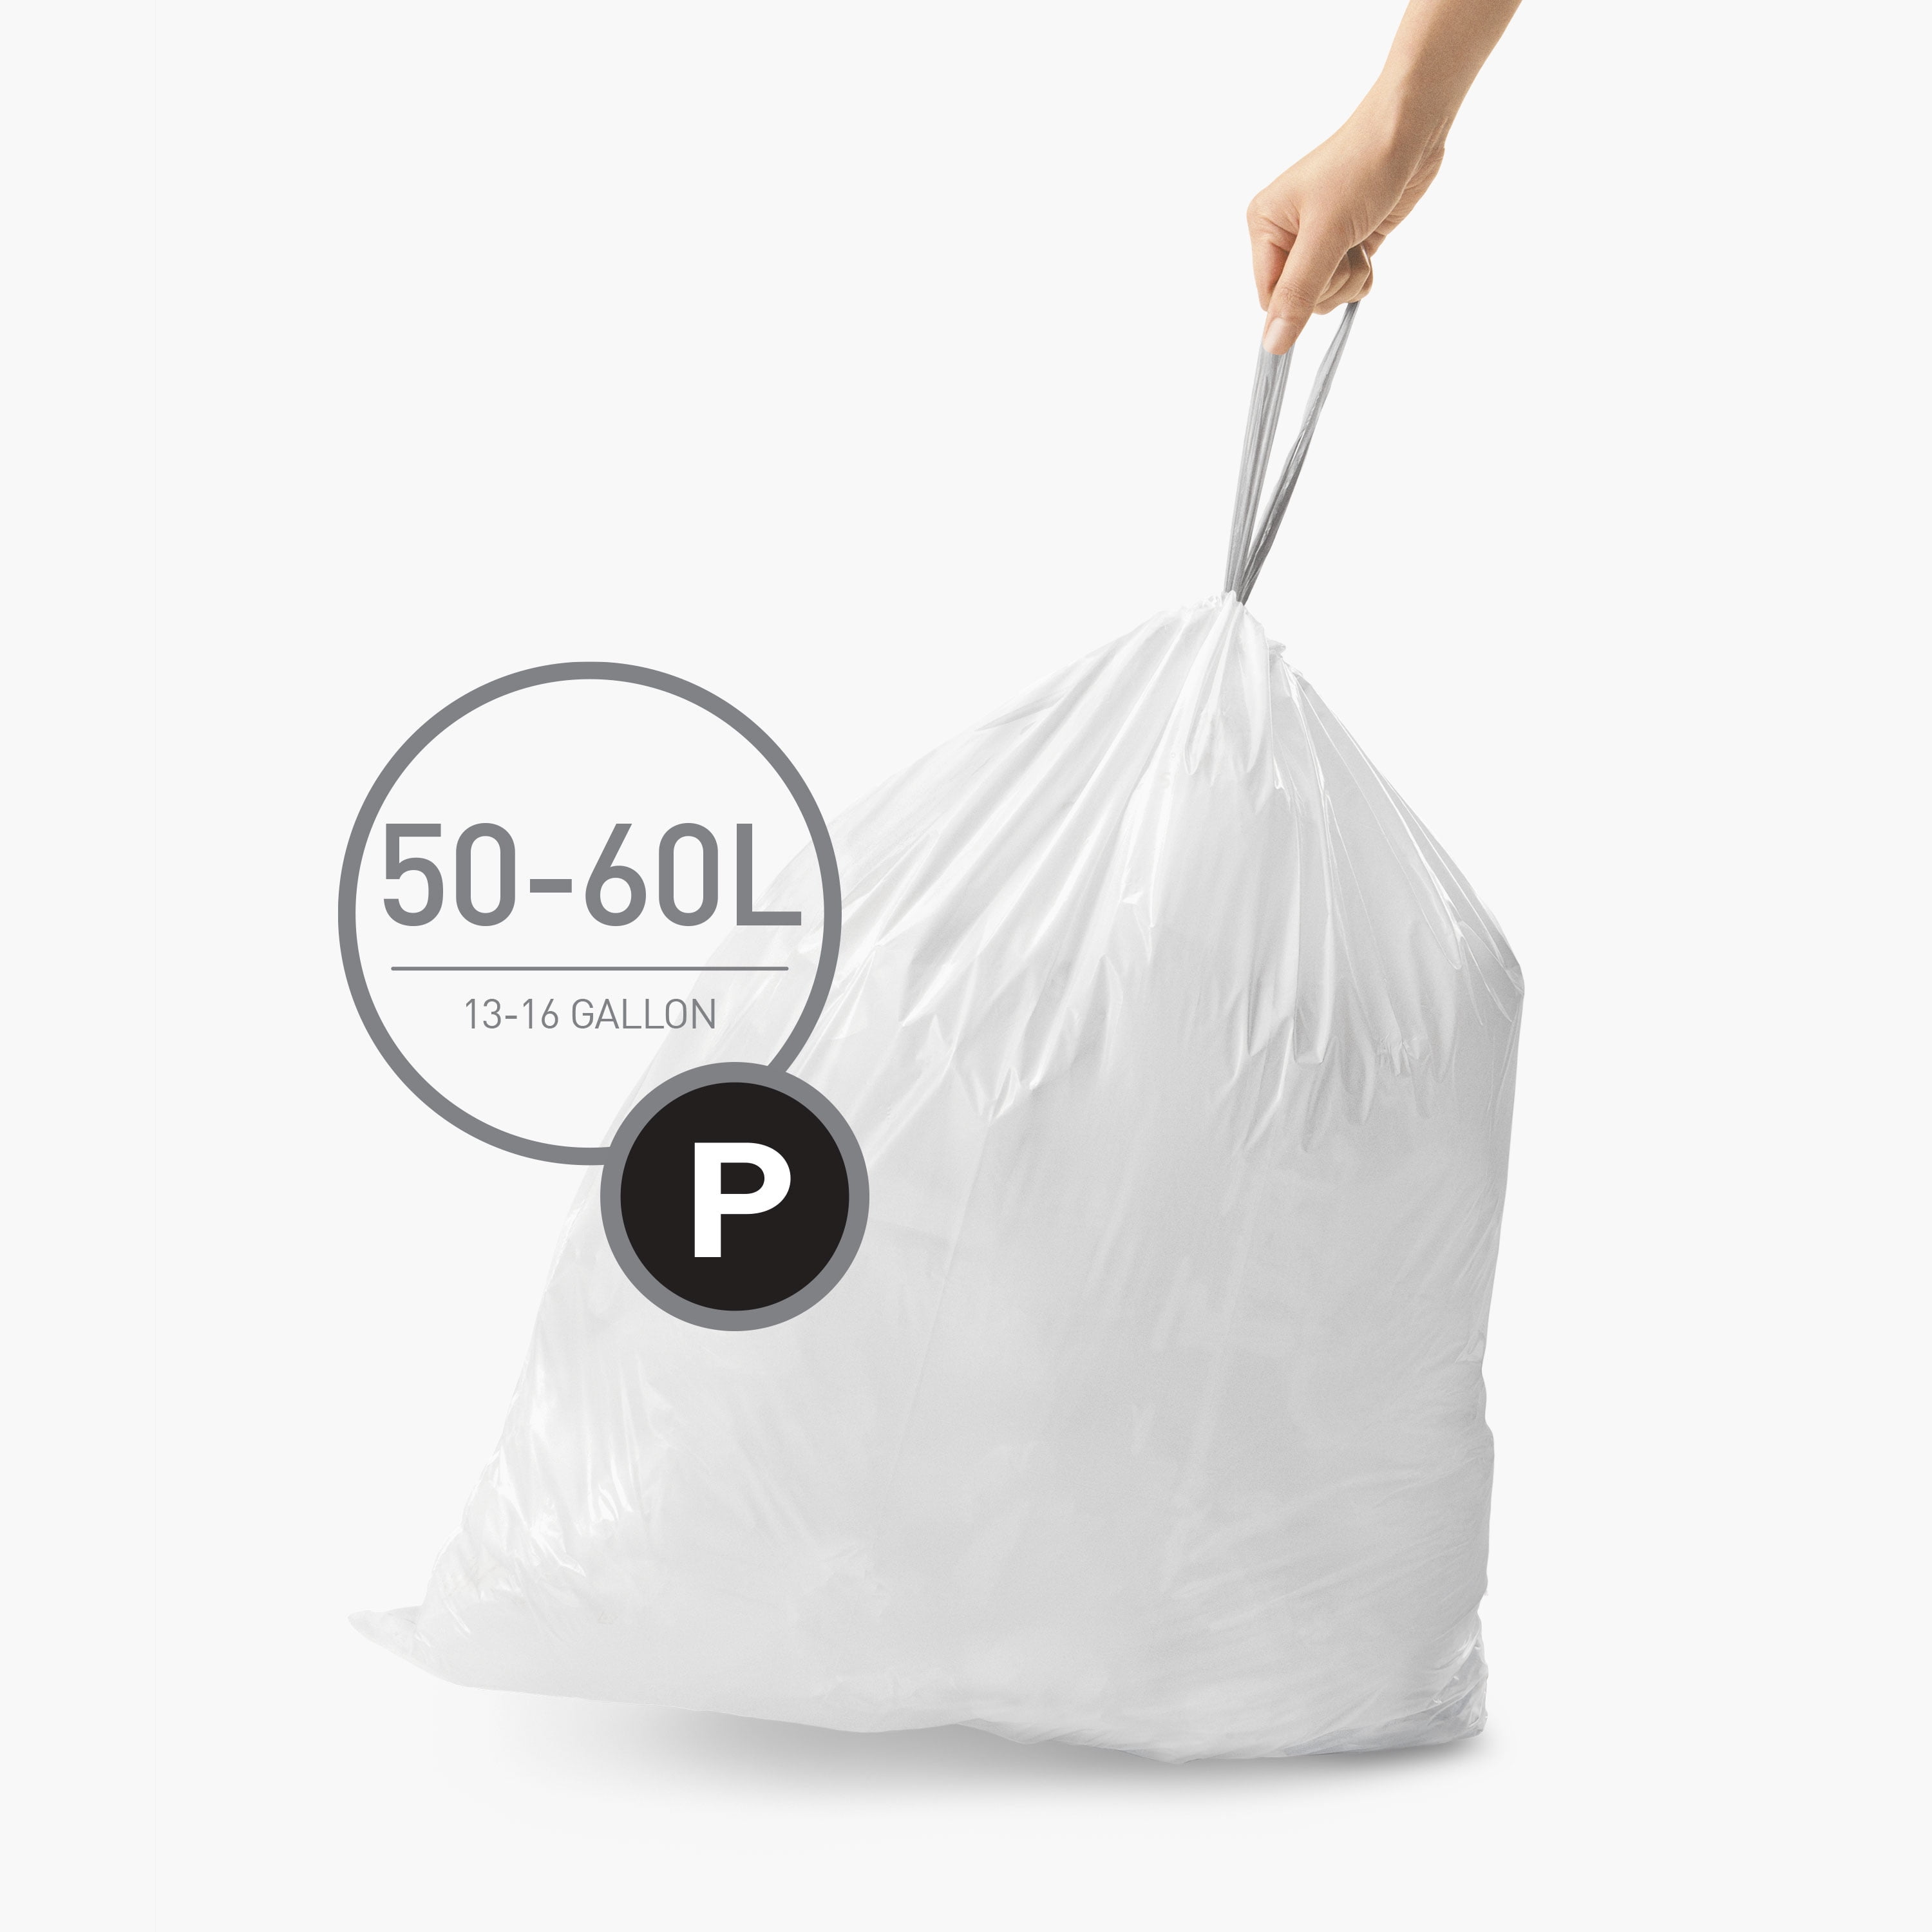 Plasticplace Custom Fit Trash Bags │ simplehuman®* Code P Compatible (200  Count)